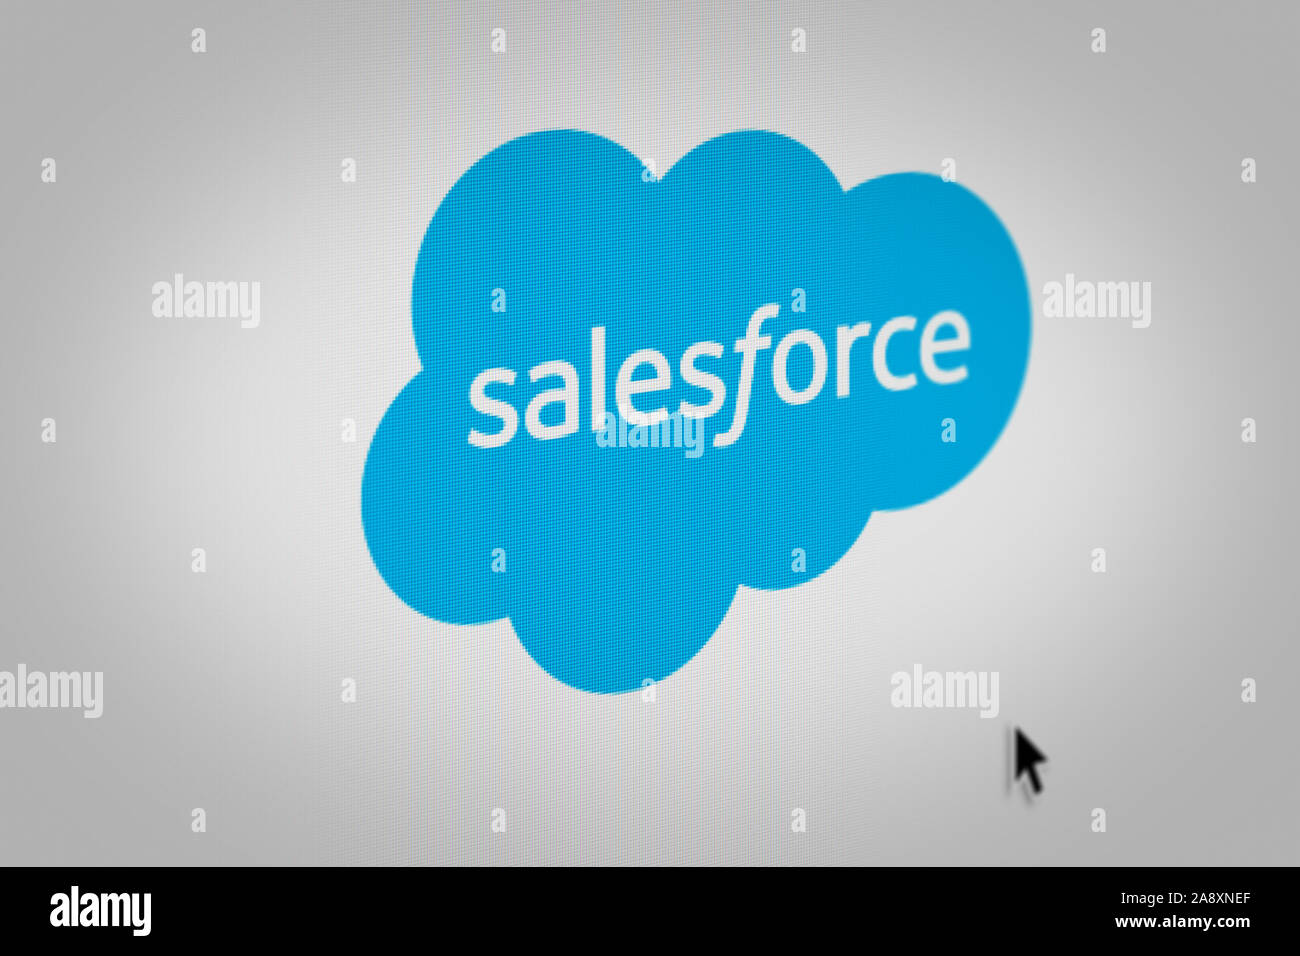 Logo of the public company Salesforce displayed on a computer screen in close-up. Credit: PIXDUCE Stock Photo